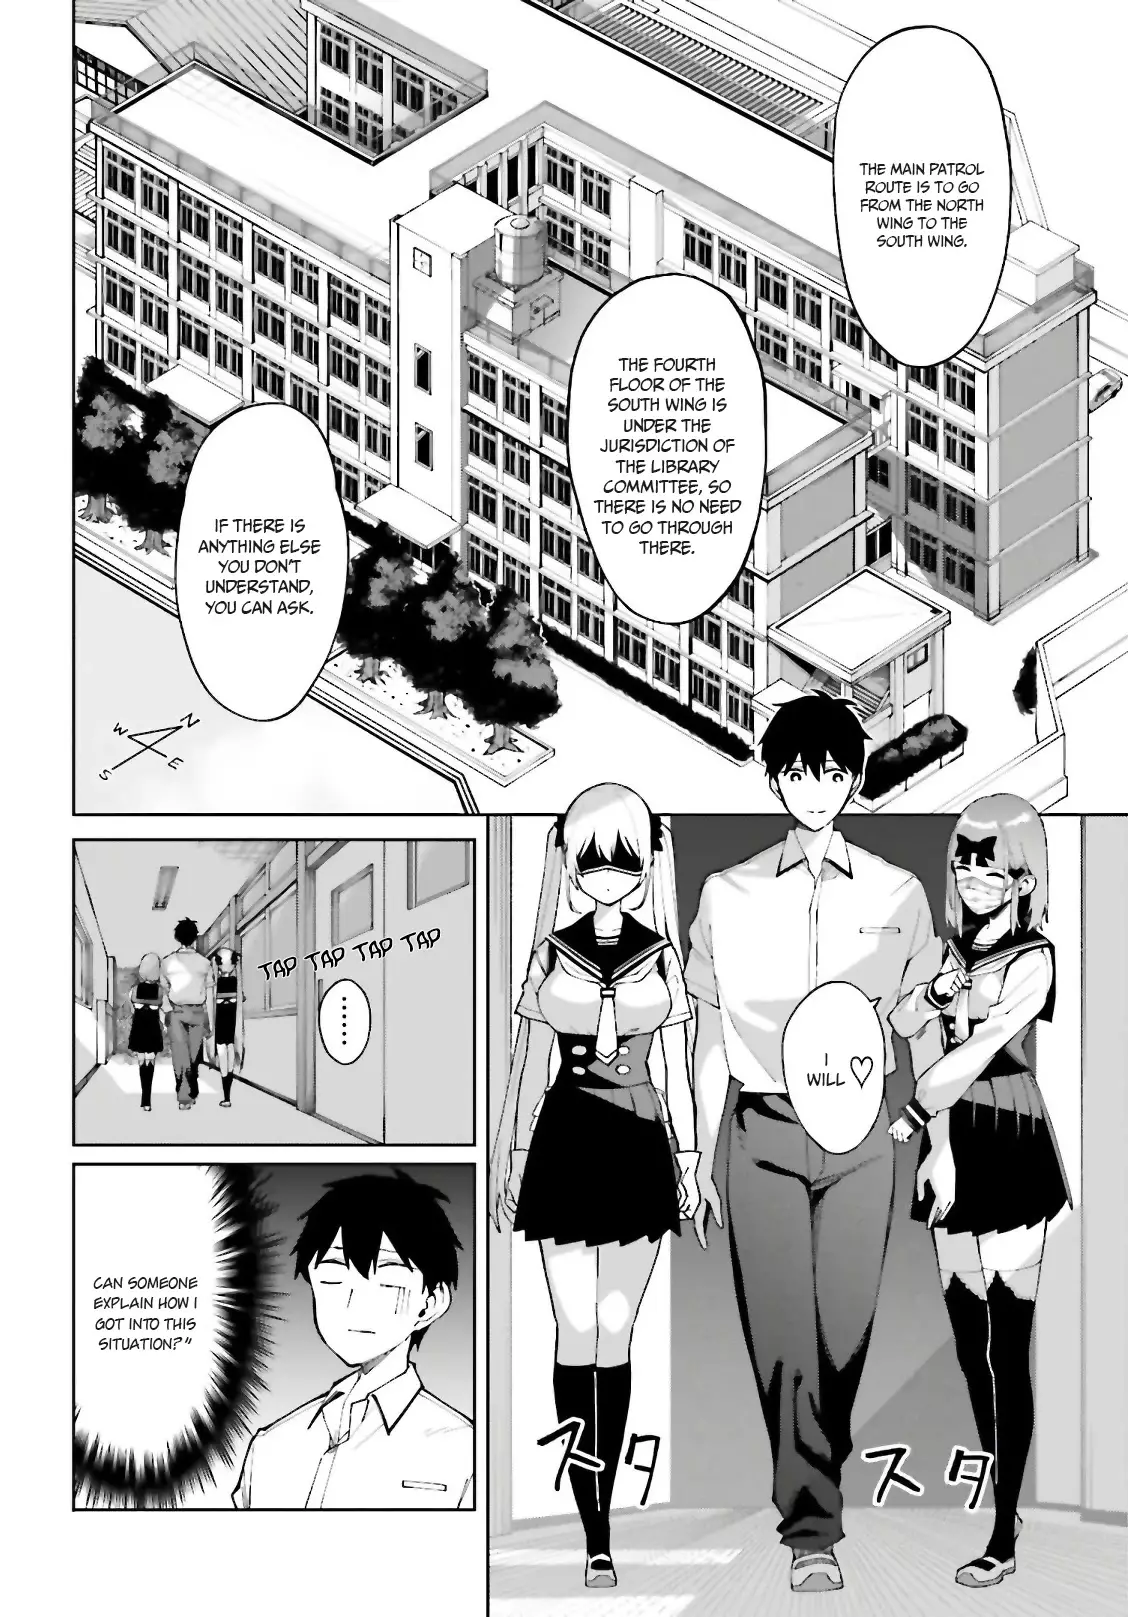 I Don't Understand Shirogane-San's Facial Expression At All - 7 page 7-6f2d2587